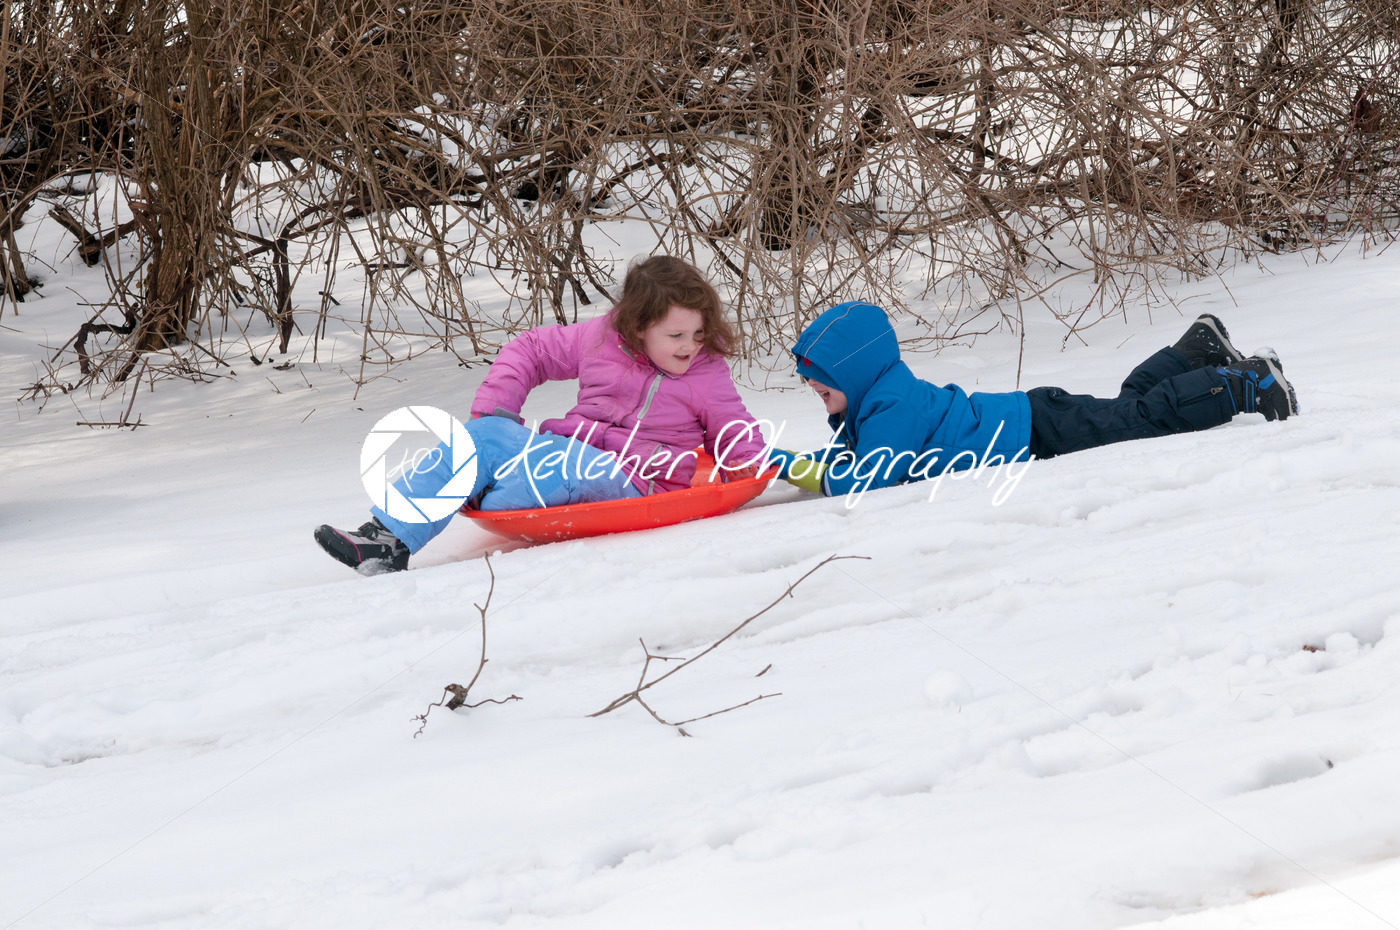 Young little girl enjoying sledding outside on a snow day while her brother holds onto the back dragging along after her - Kelleher Photography Store